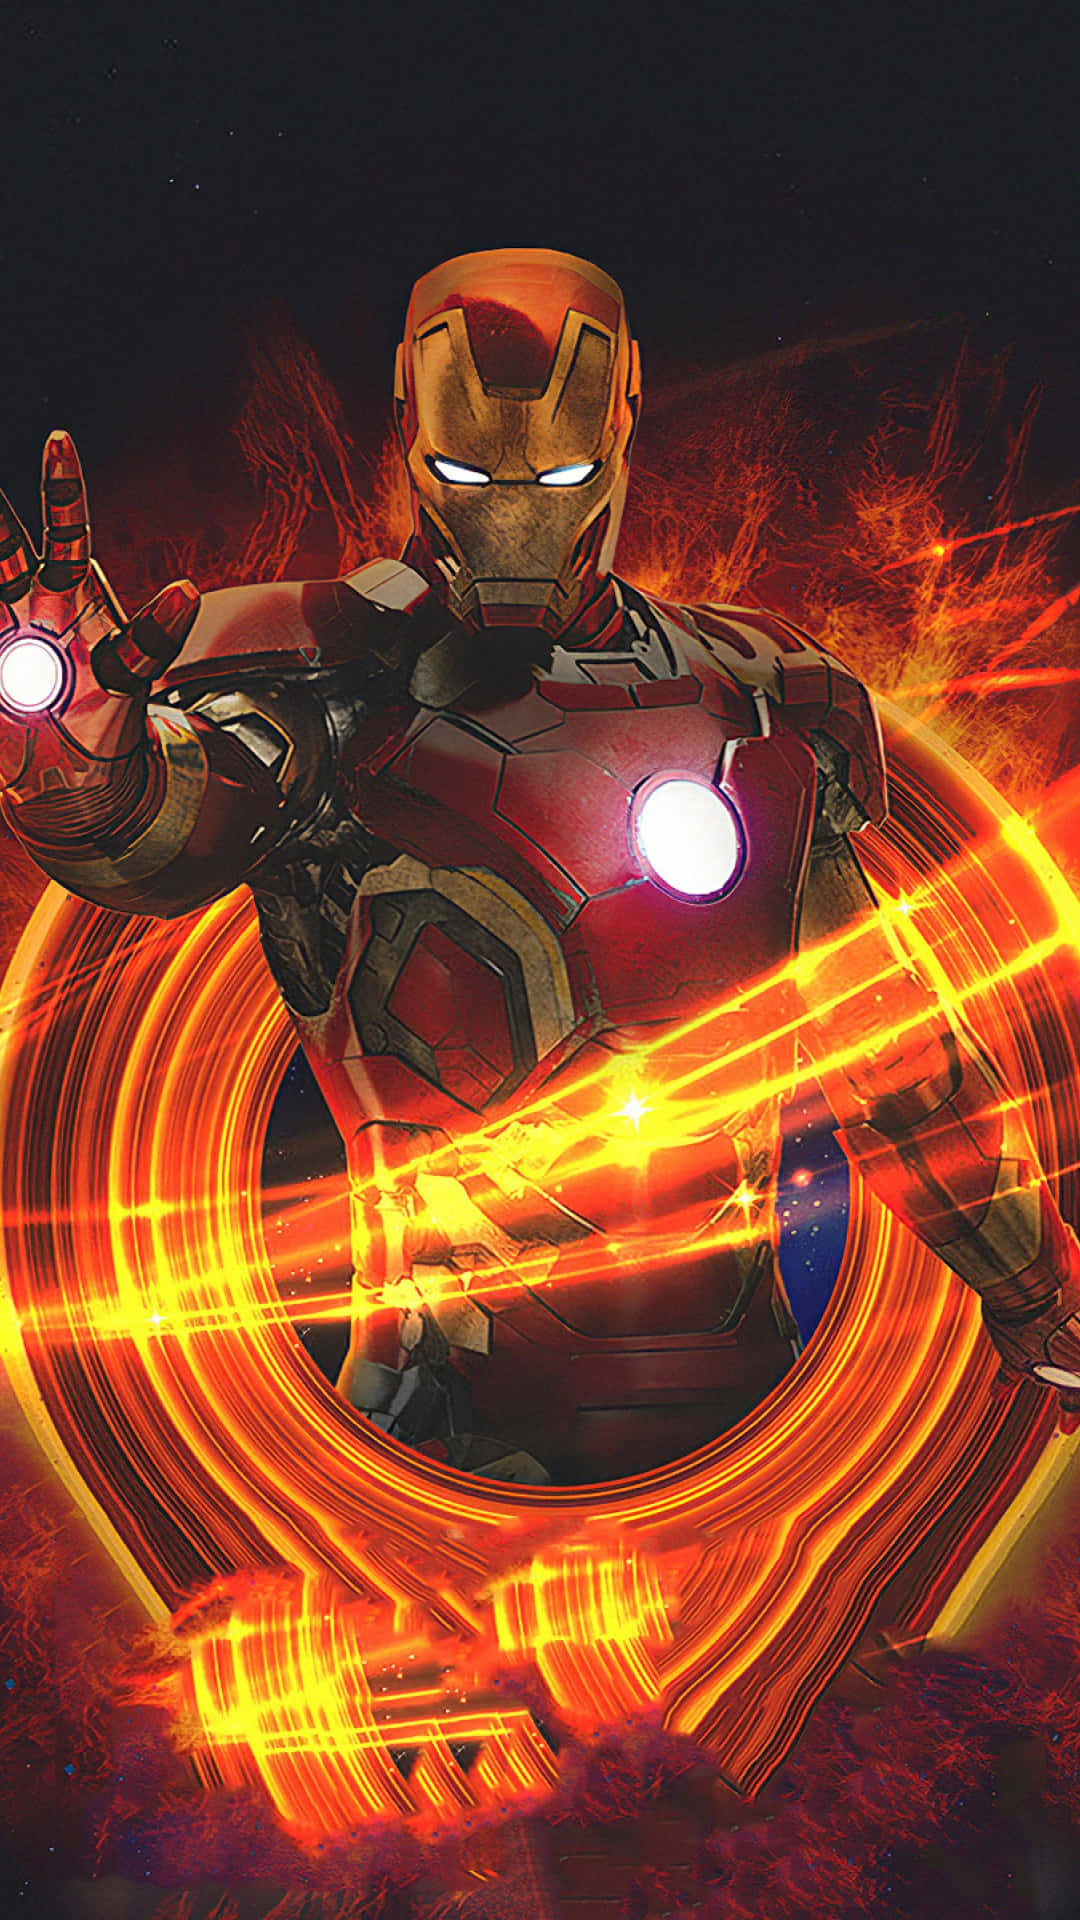 Iron Man In The Fire Wallpaper